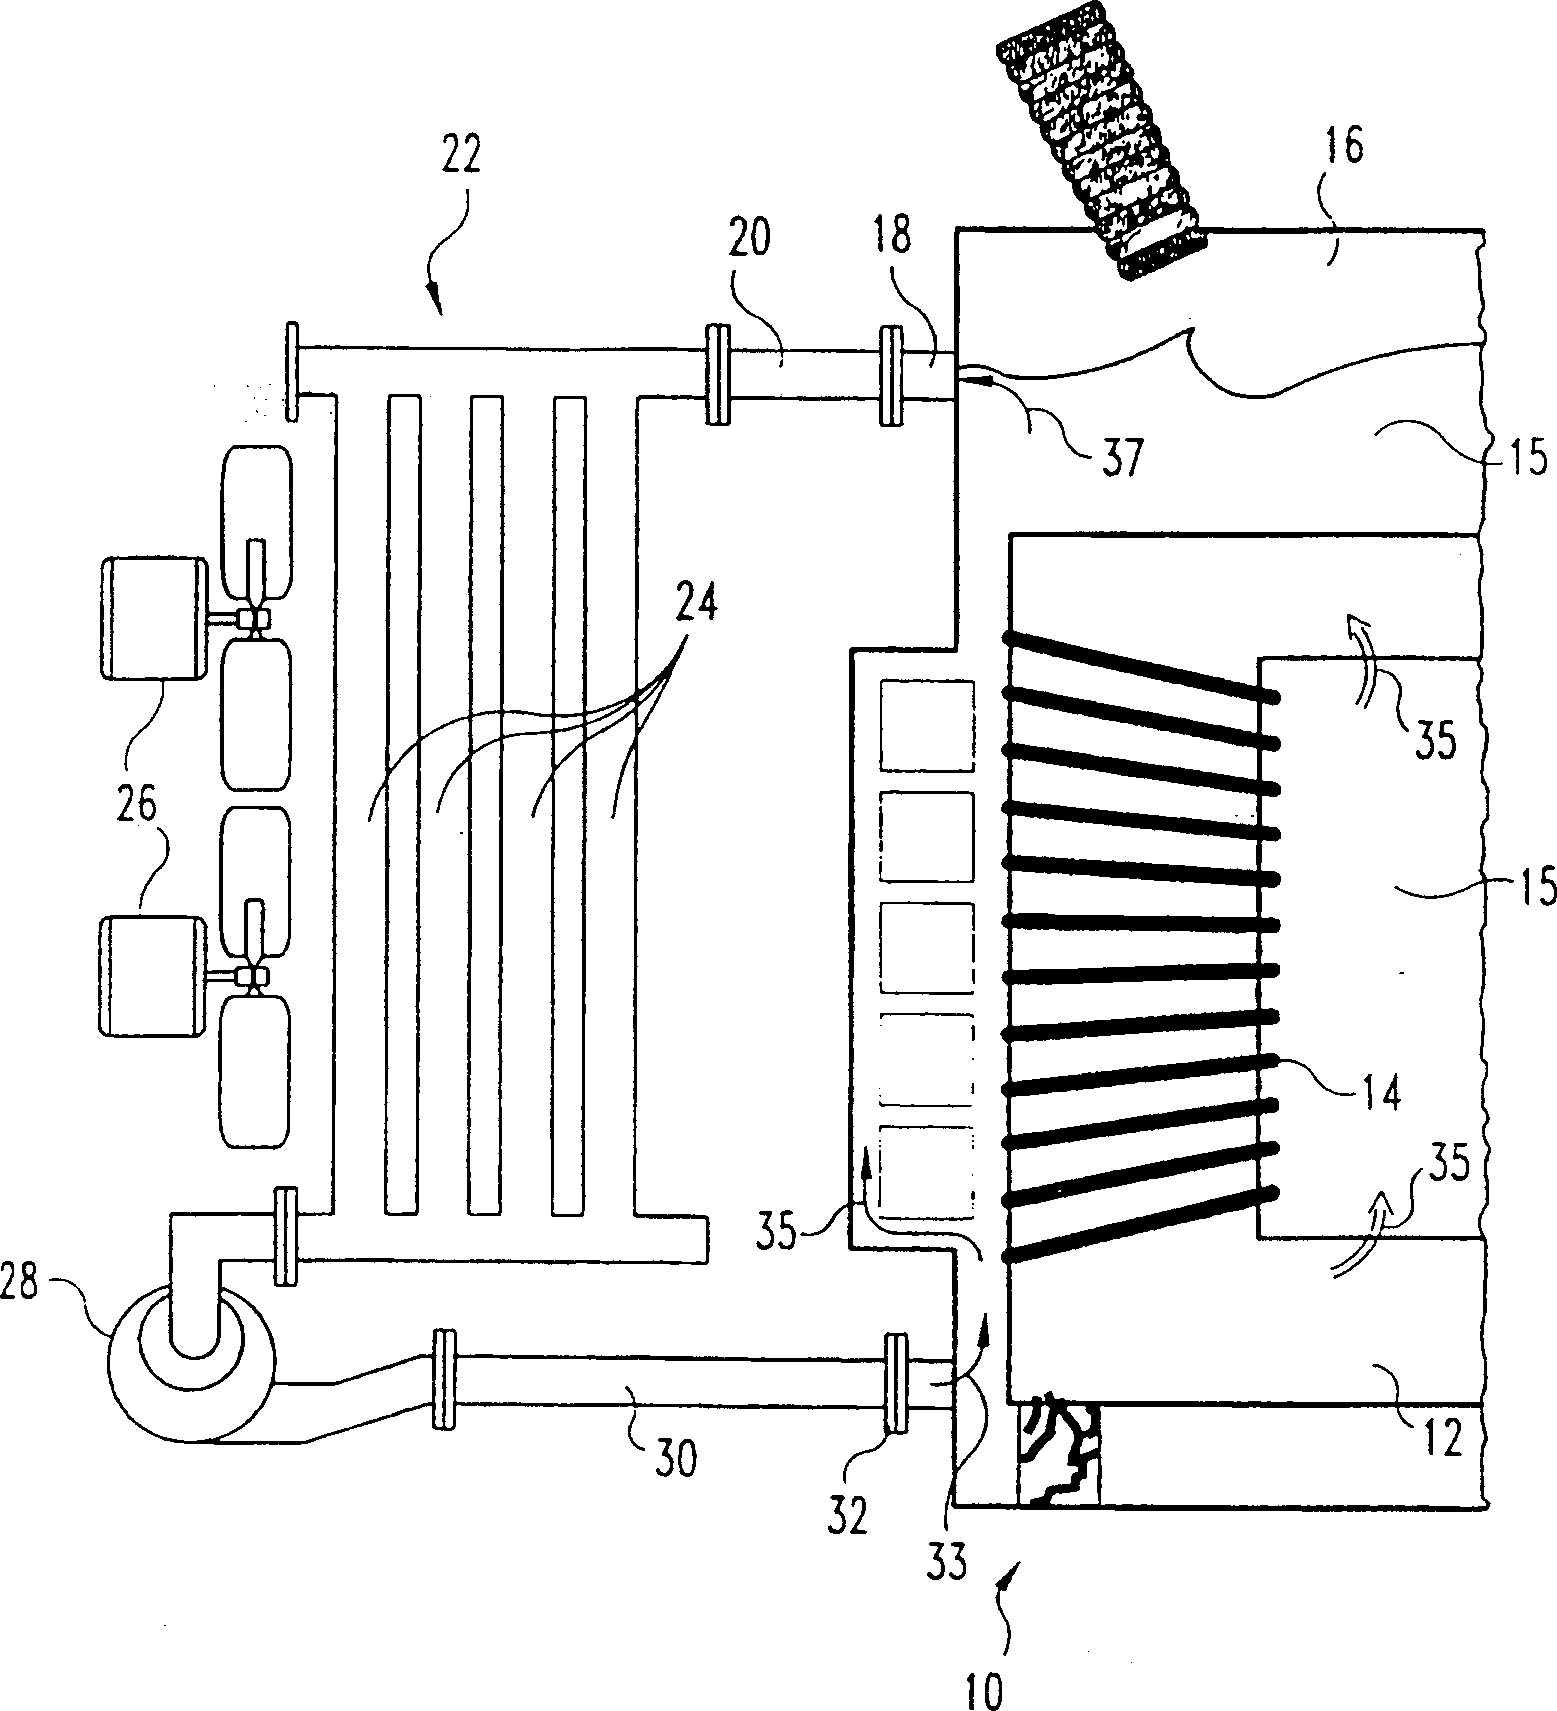 Apparatus and method for cooling power transformers